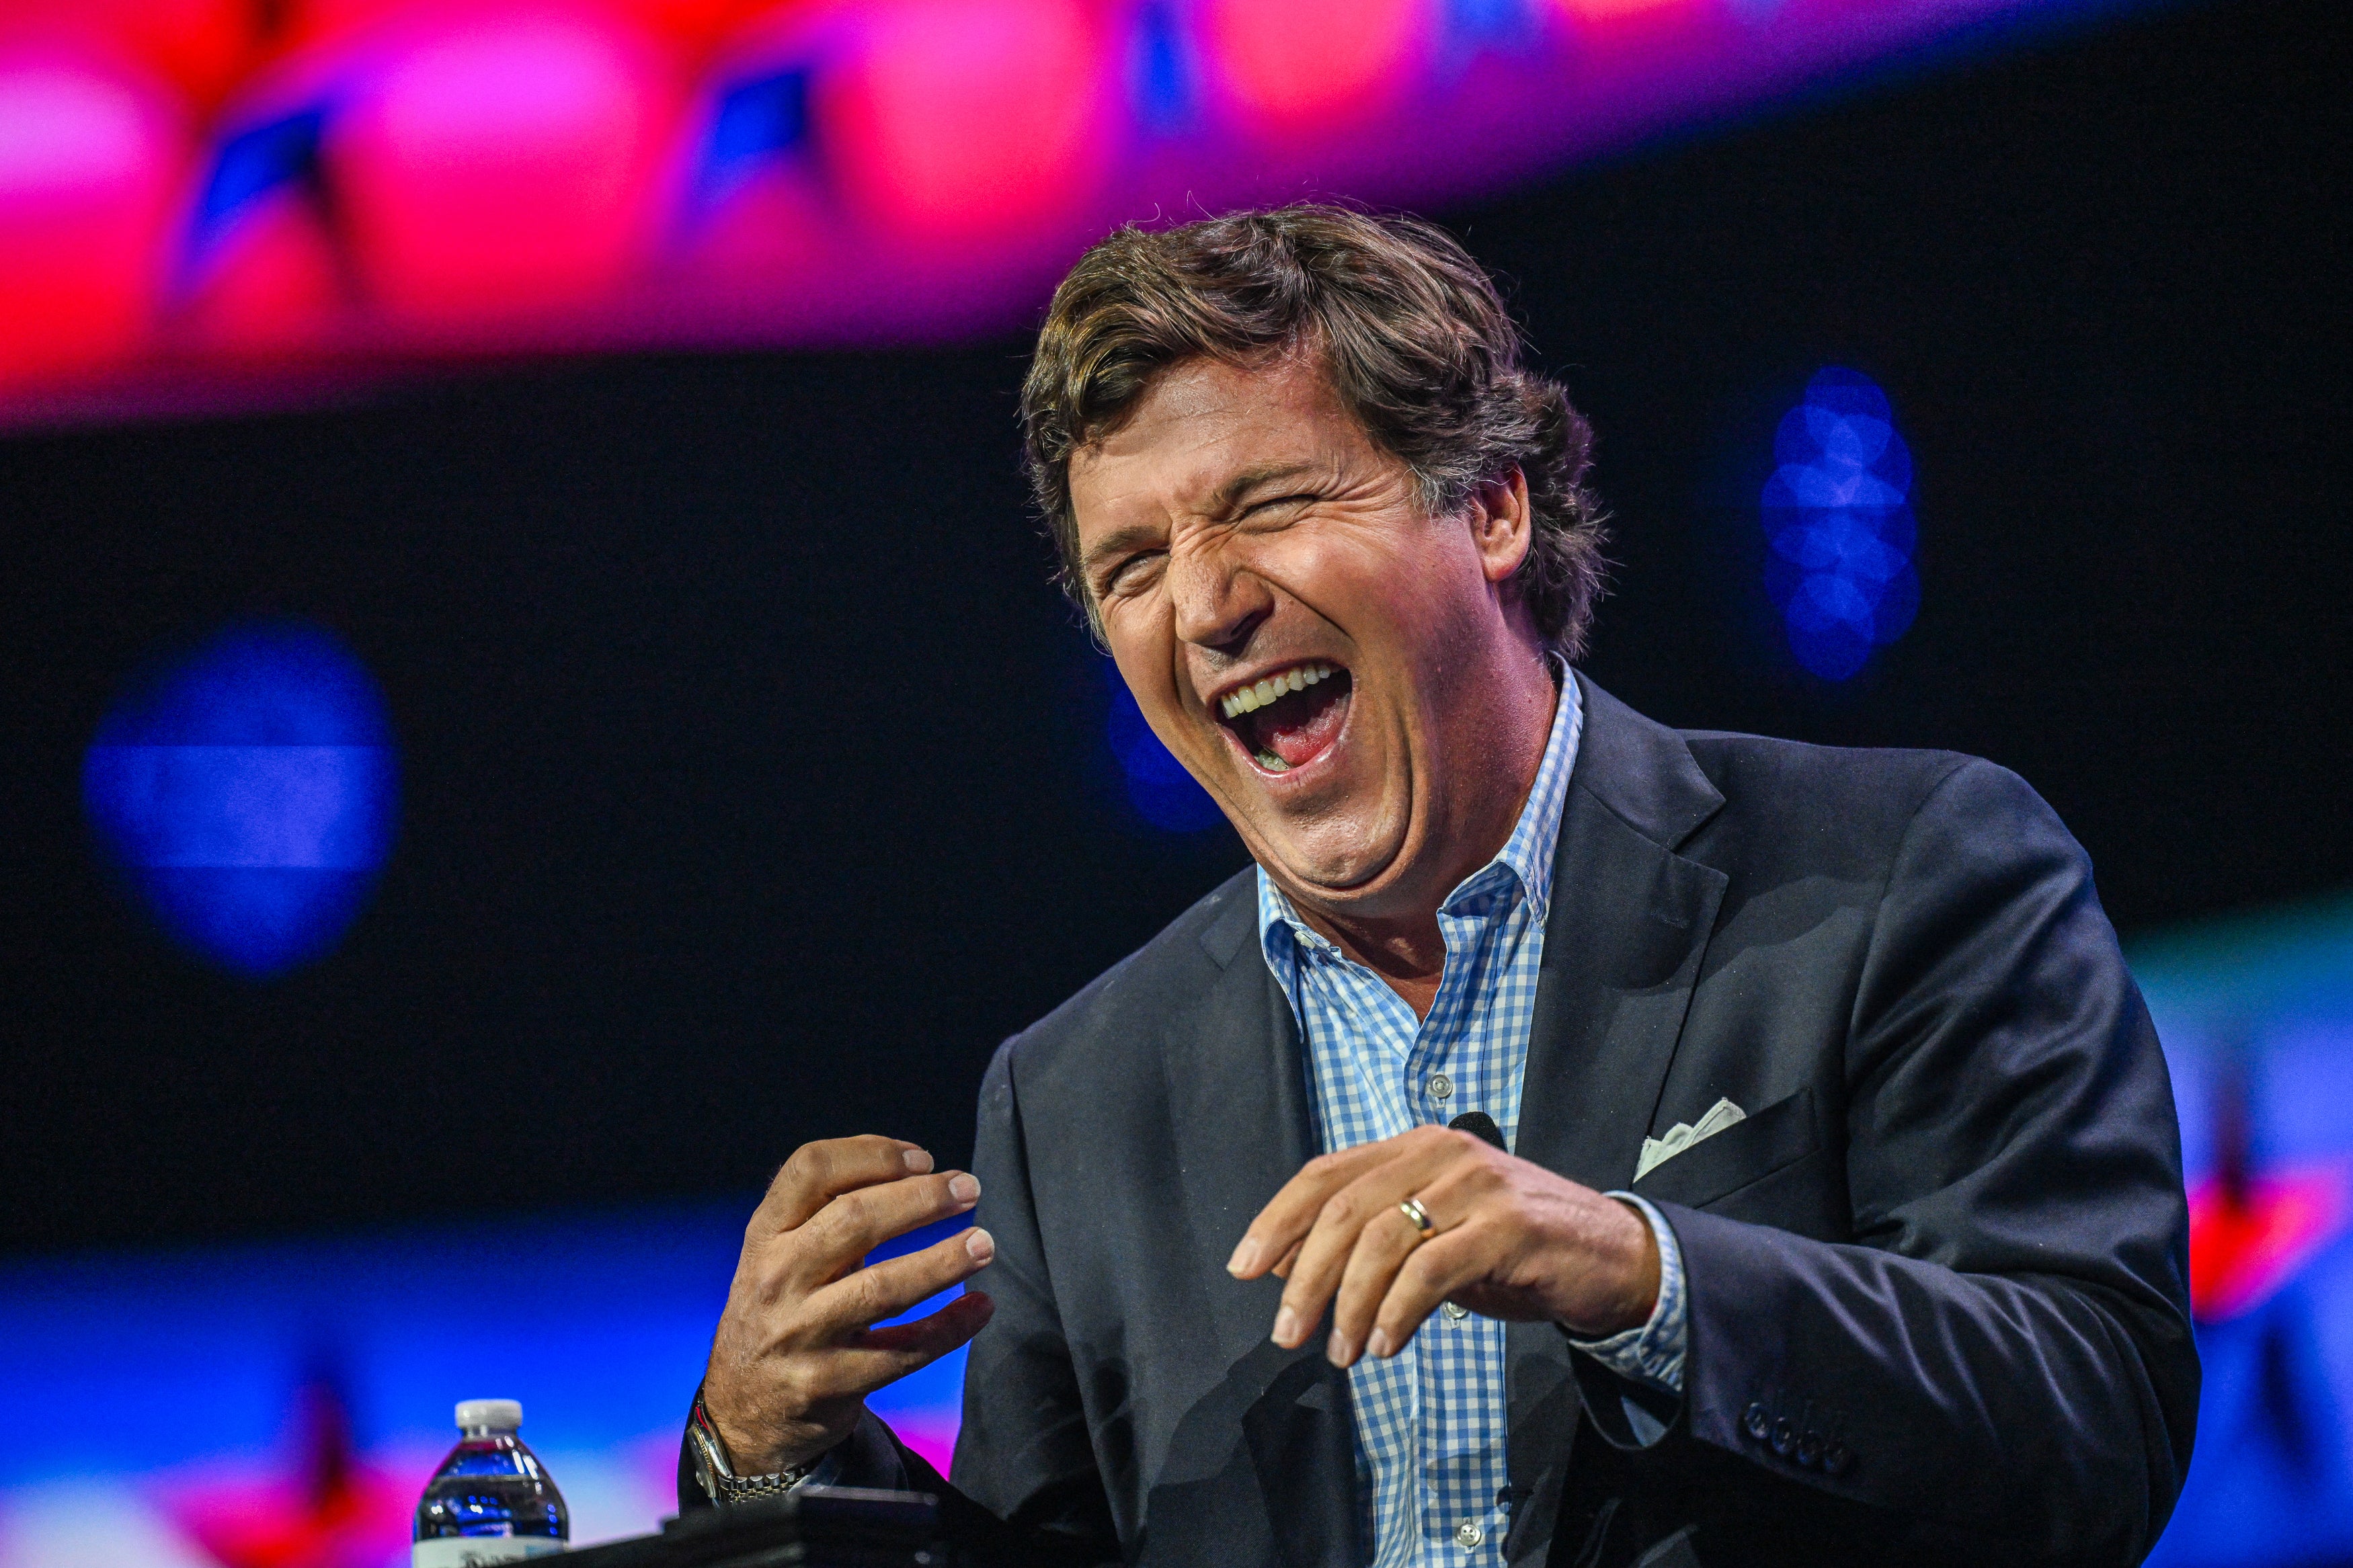 Tucker Carlson addresses the Turning Point Action Conference in Florida on 15 July.